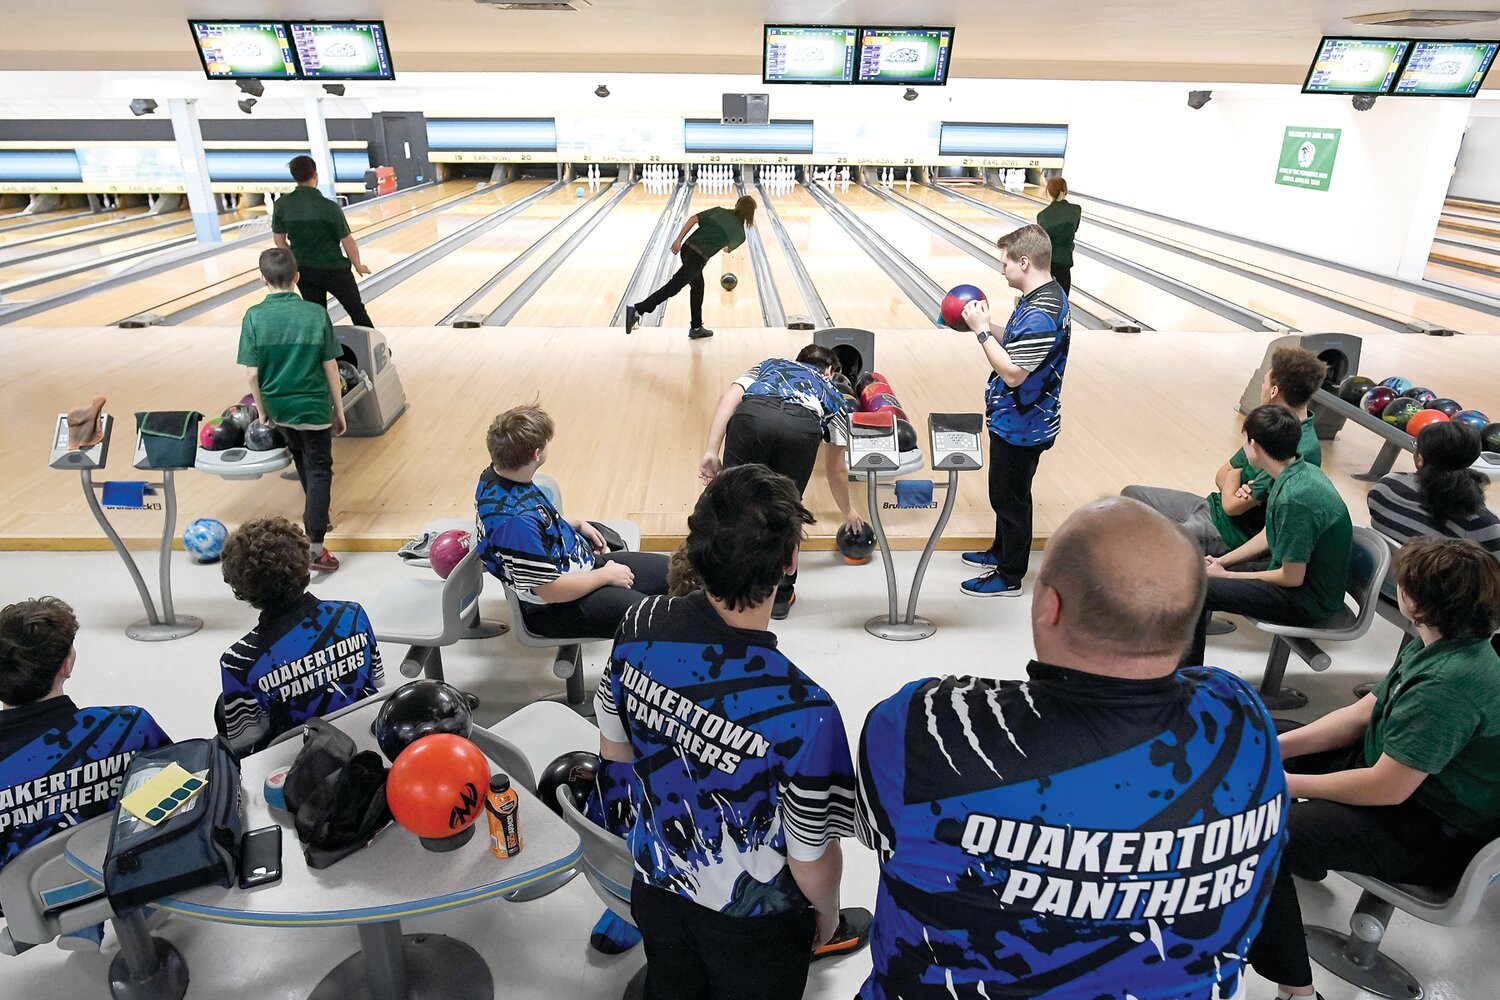 Quakertown and Pennridge bowling teams compete at Earl-Bowl Lanes Jan. 22. Although competitors during the match, both teams are friendly outside of competition.